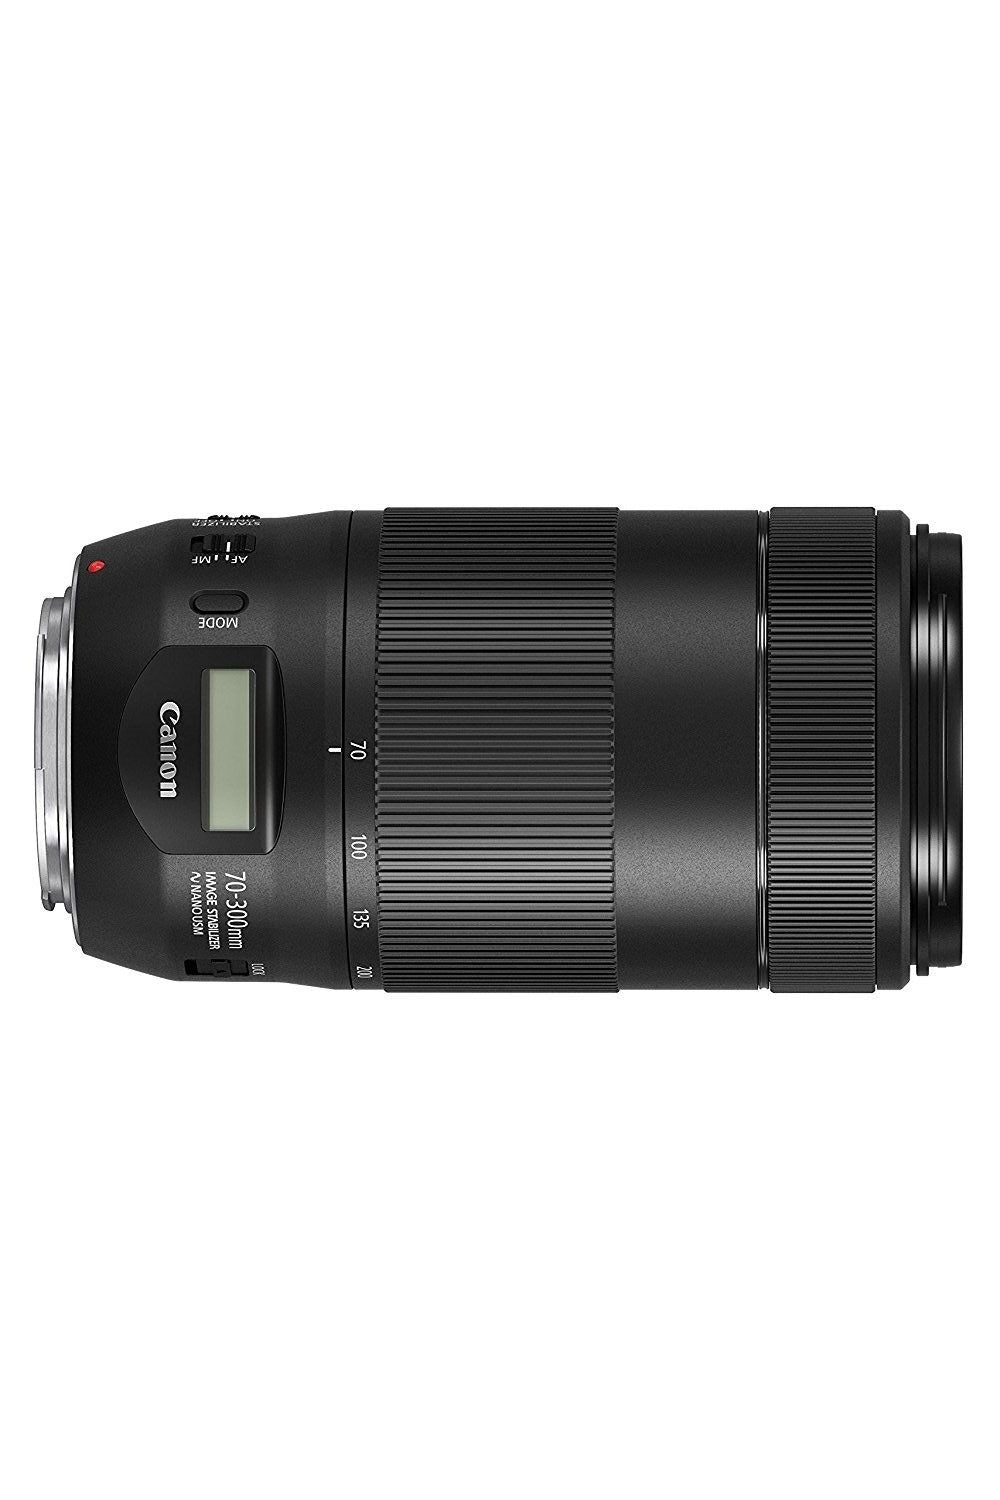 Canon EF 70-300mm F4-5.6 IS II USM Telephoto Zoom Image Stabilised Camera Lens - Product Photo 2 - Side View, Top down perspective